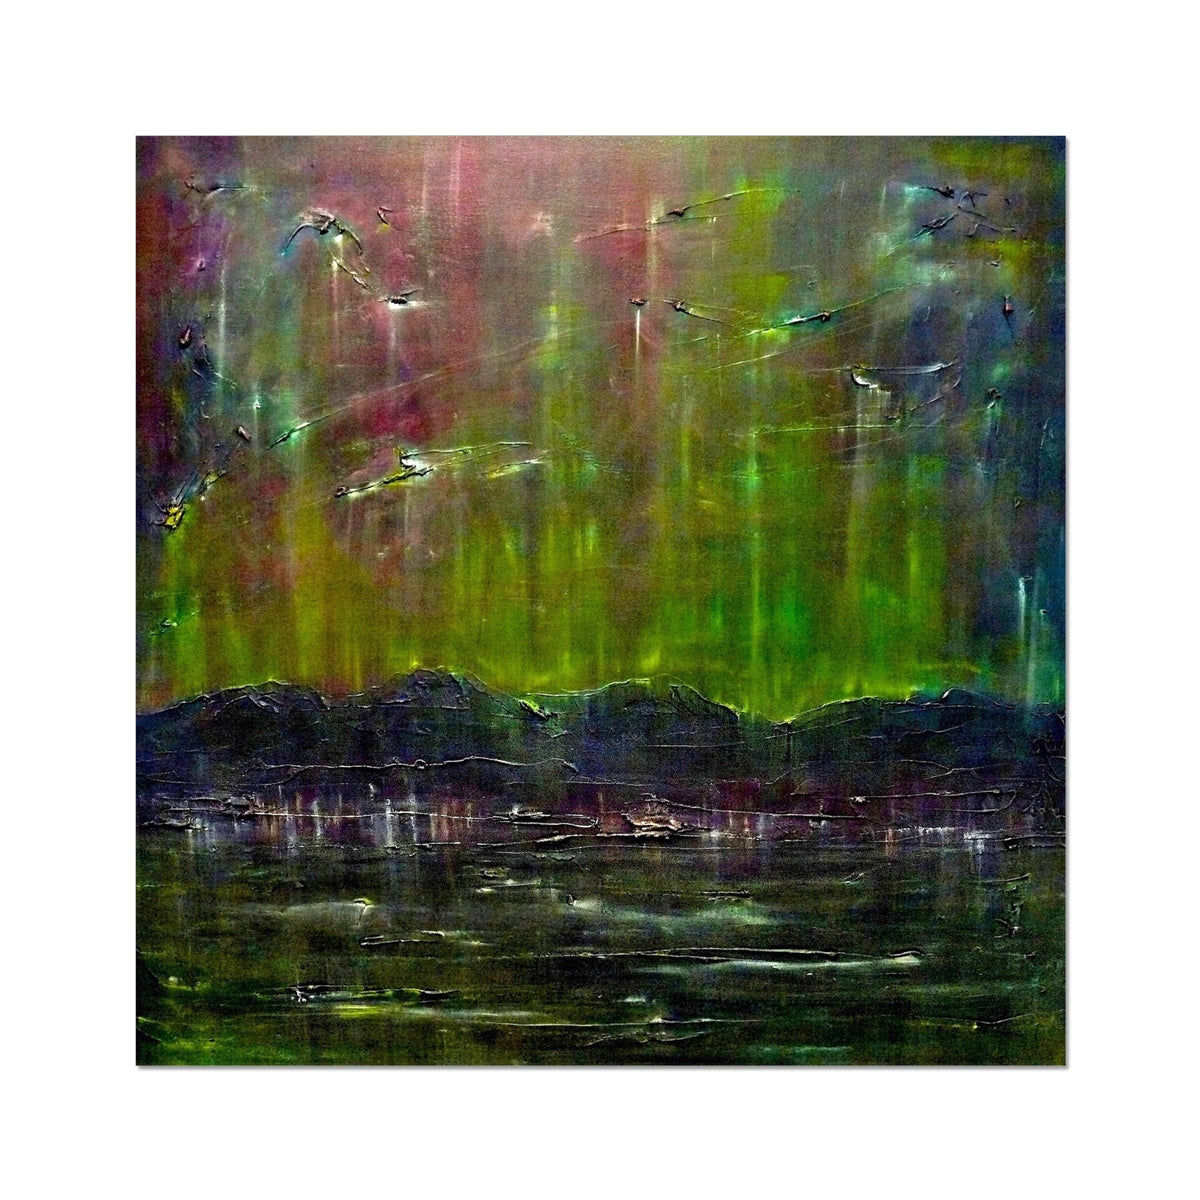 Cromarty Harbour Northern Lights Painting | Artist Proof Collector Prints From Scotland-Artist Proof Collector Prints-Scottish Highlands & Lowlands Art Gallery-20"x20"-Paintings, Prints, Homeware, Art Gifts From Scotland By Scottish Artist Kevin Hunter